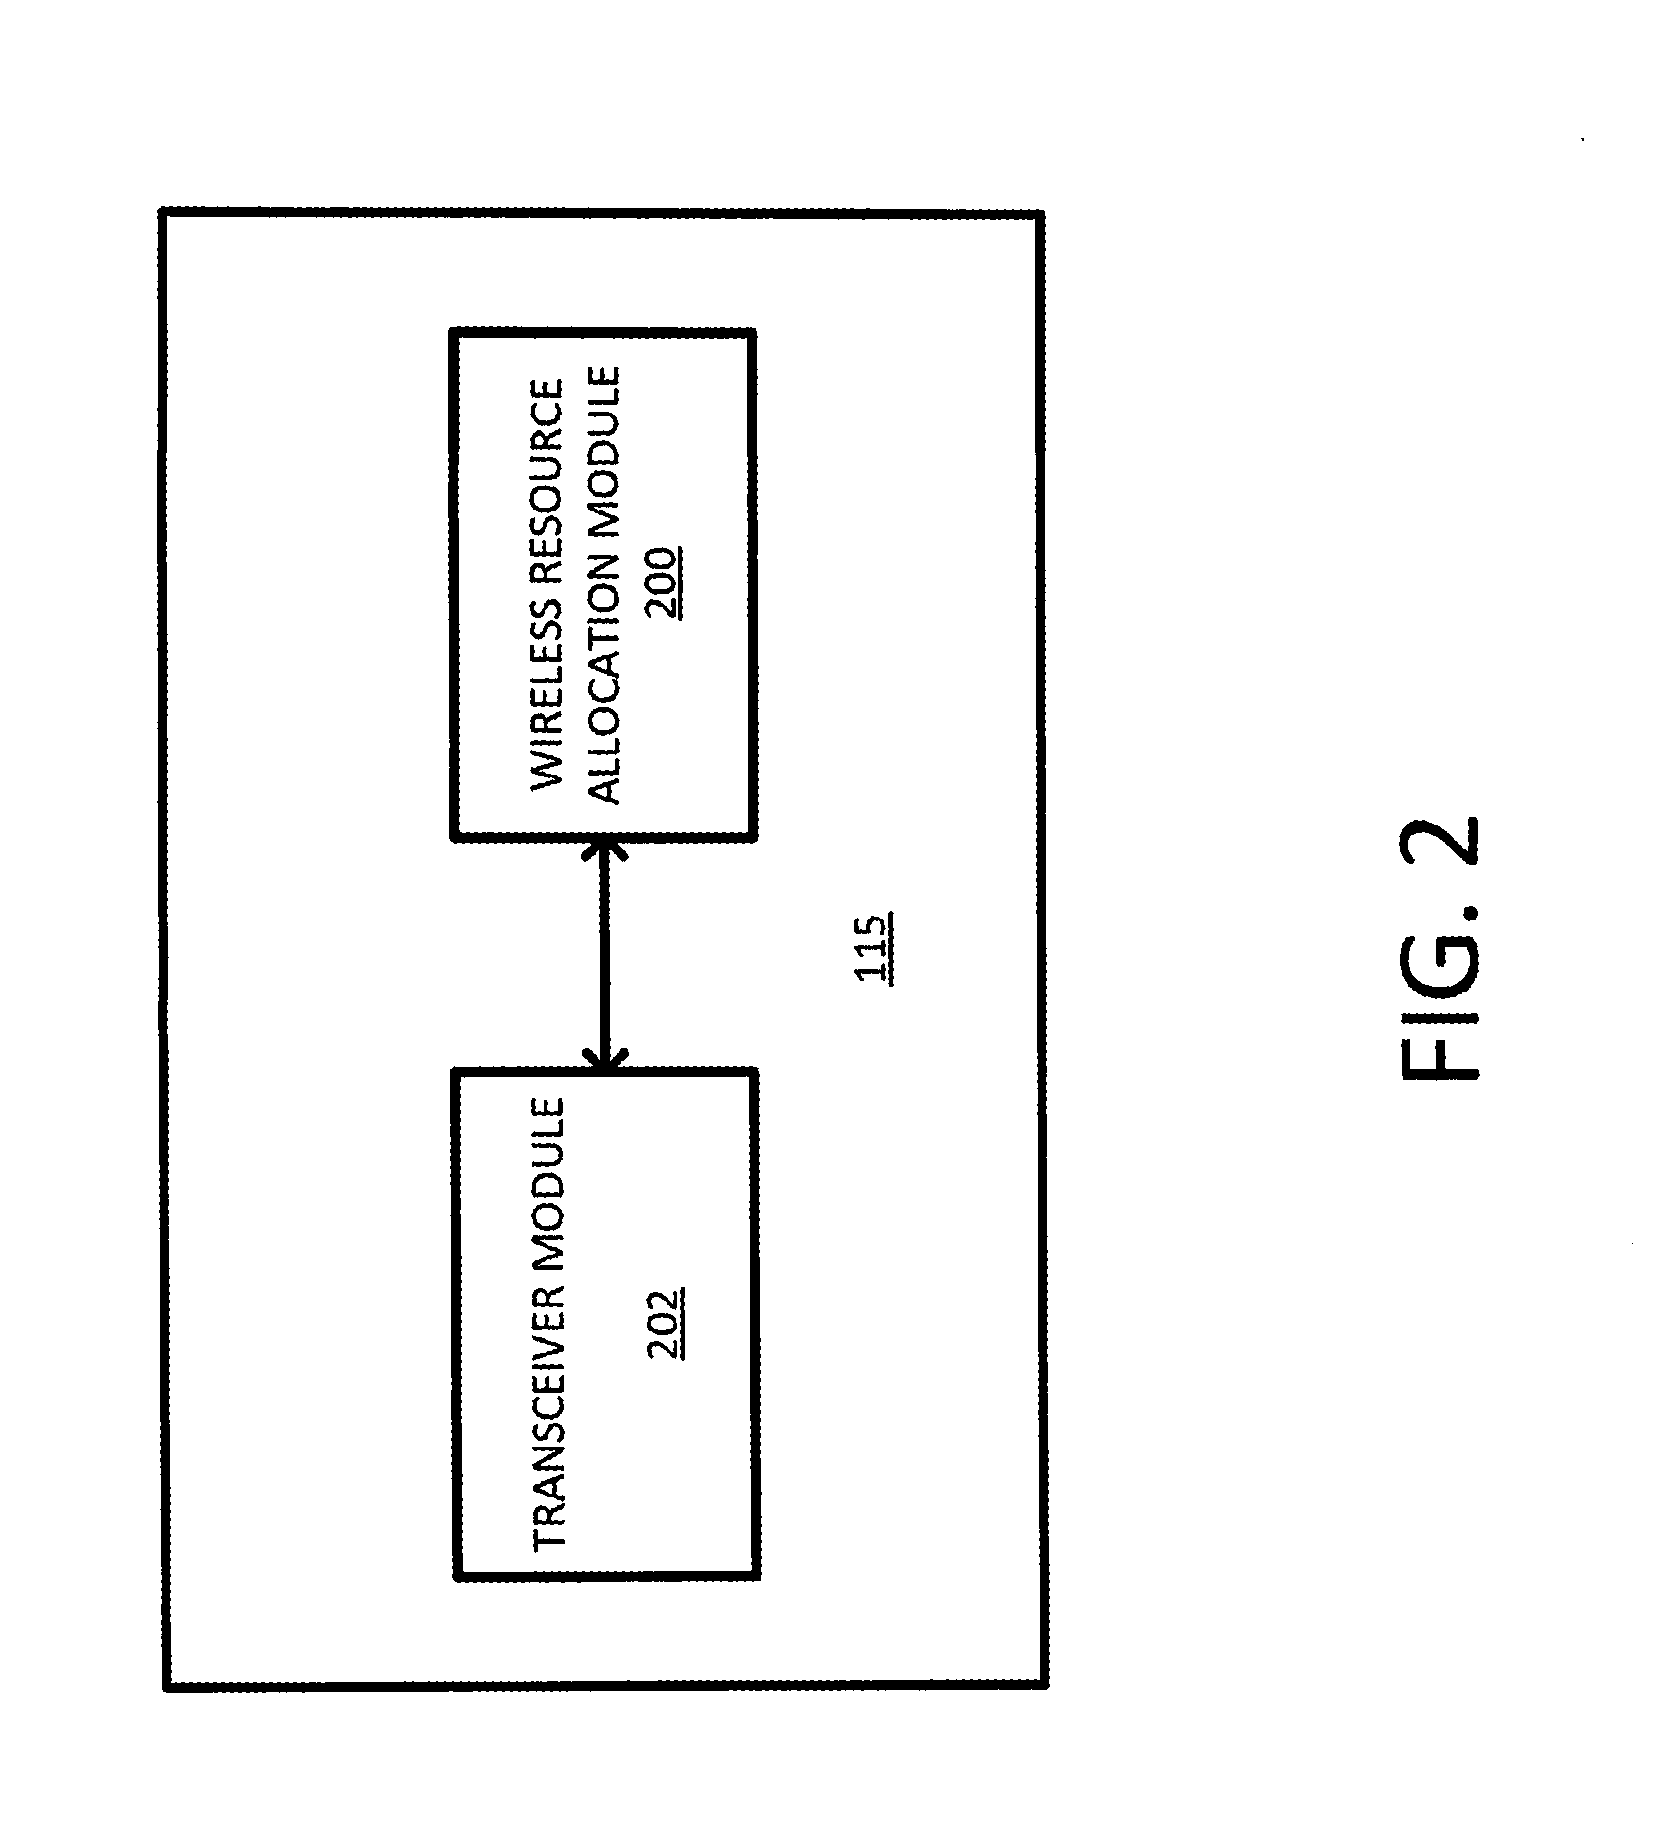 Methods and apparatuses for allocating wireless resources in wireless network